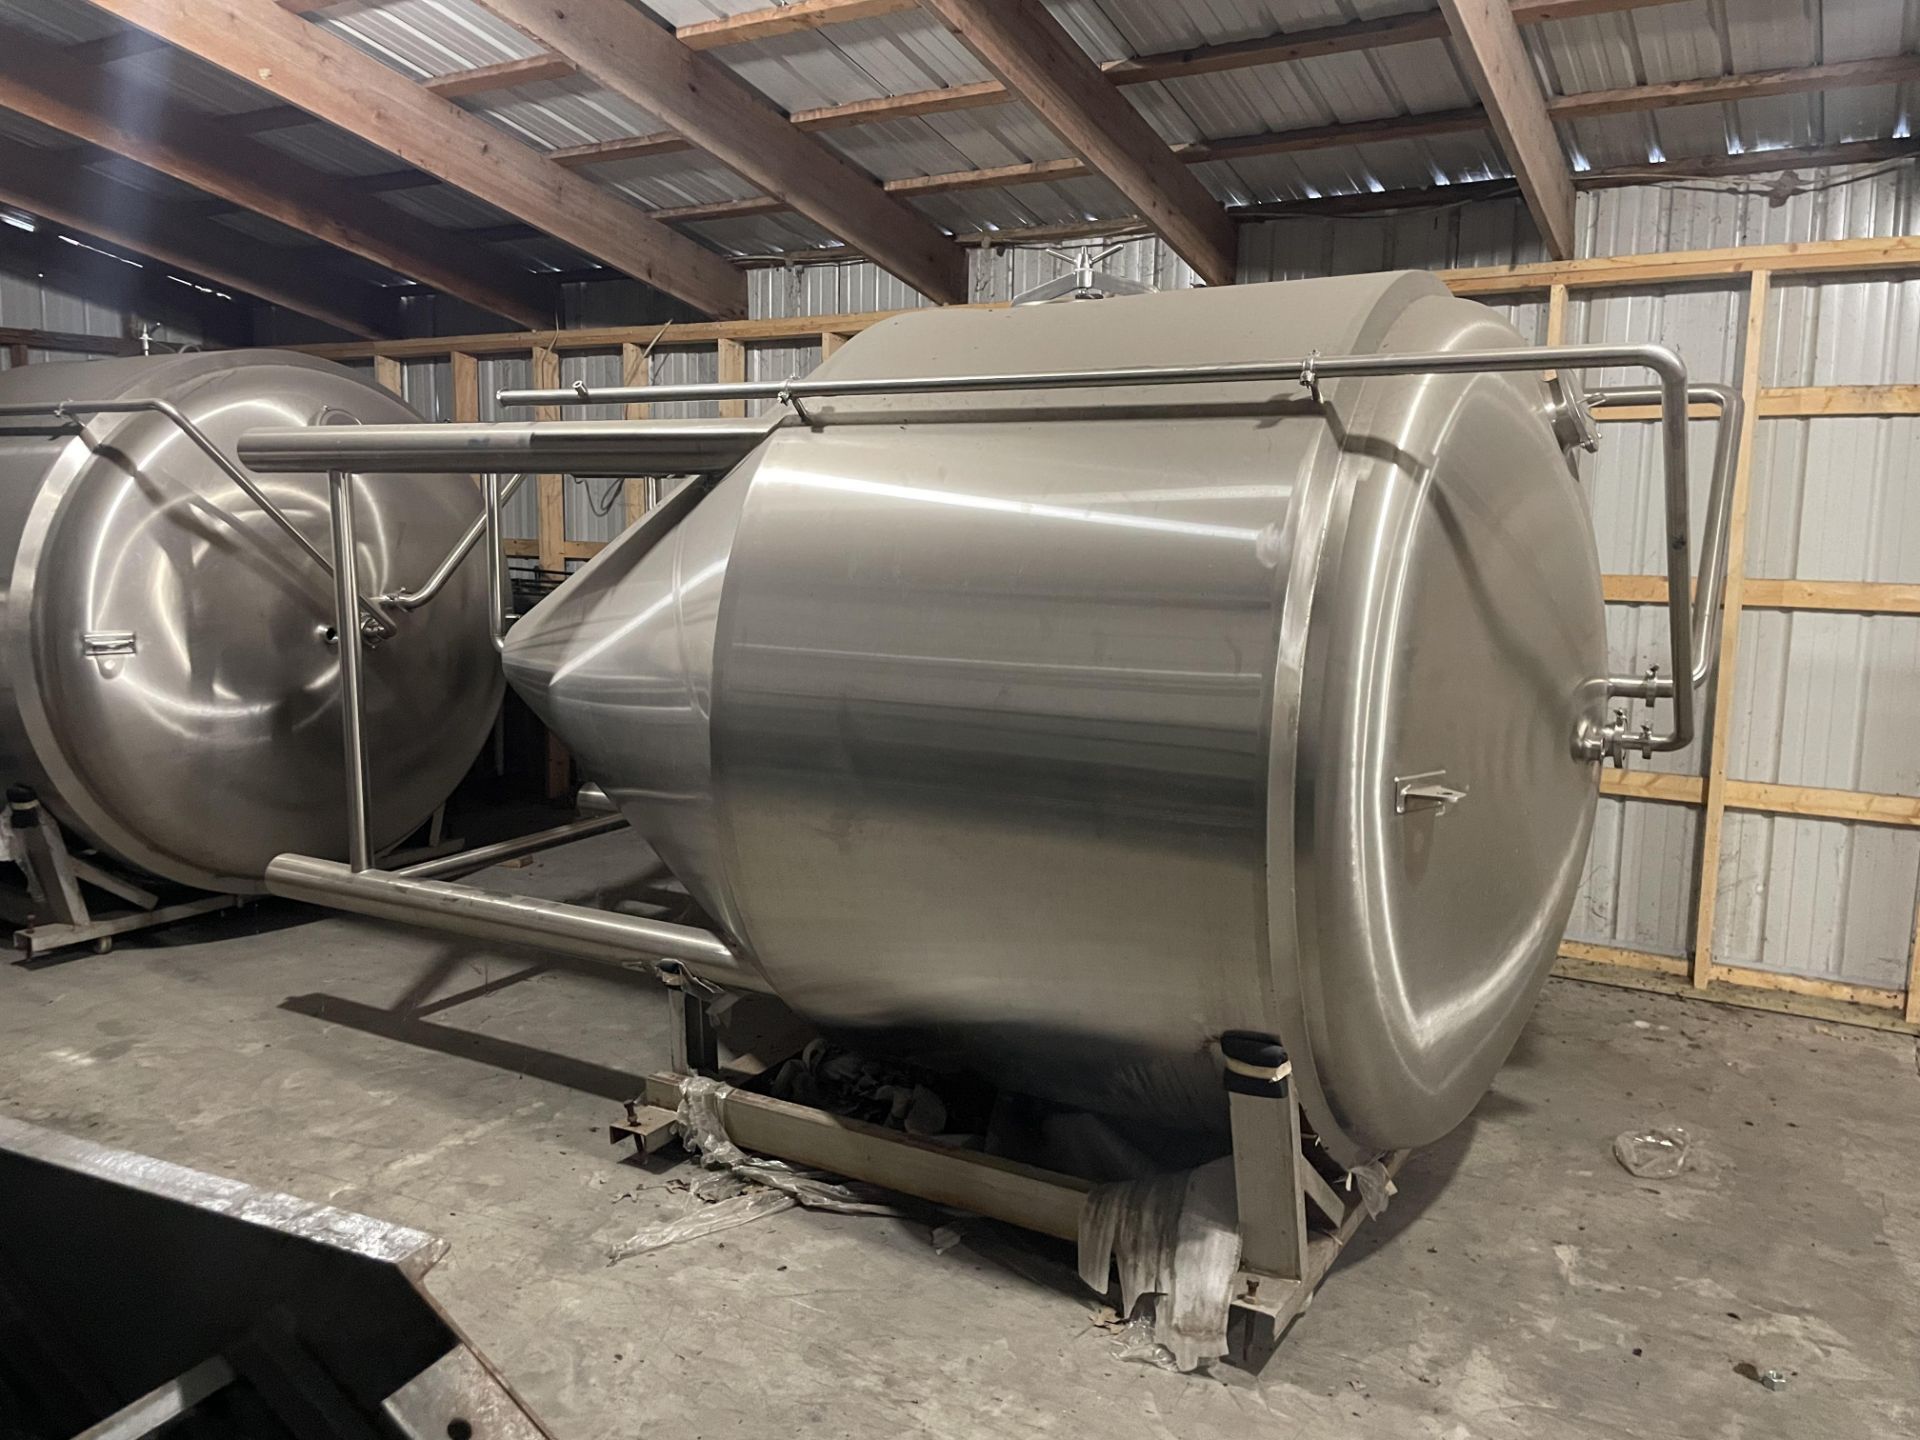 Consignment Item - located in Breese, IL: Lot of (1) NEVER USED, Kent 40 bbl Beer Fermenter, 2014